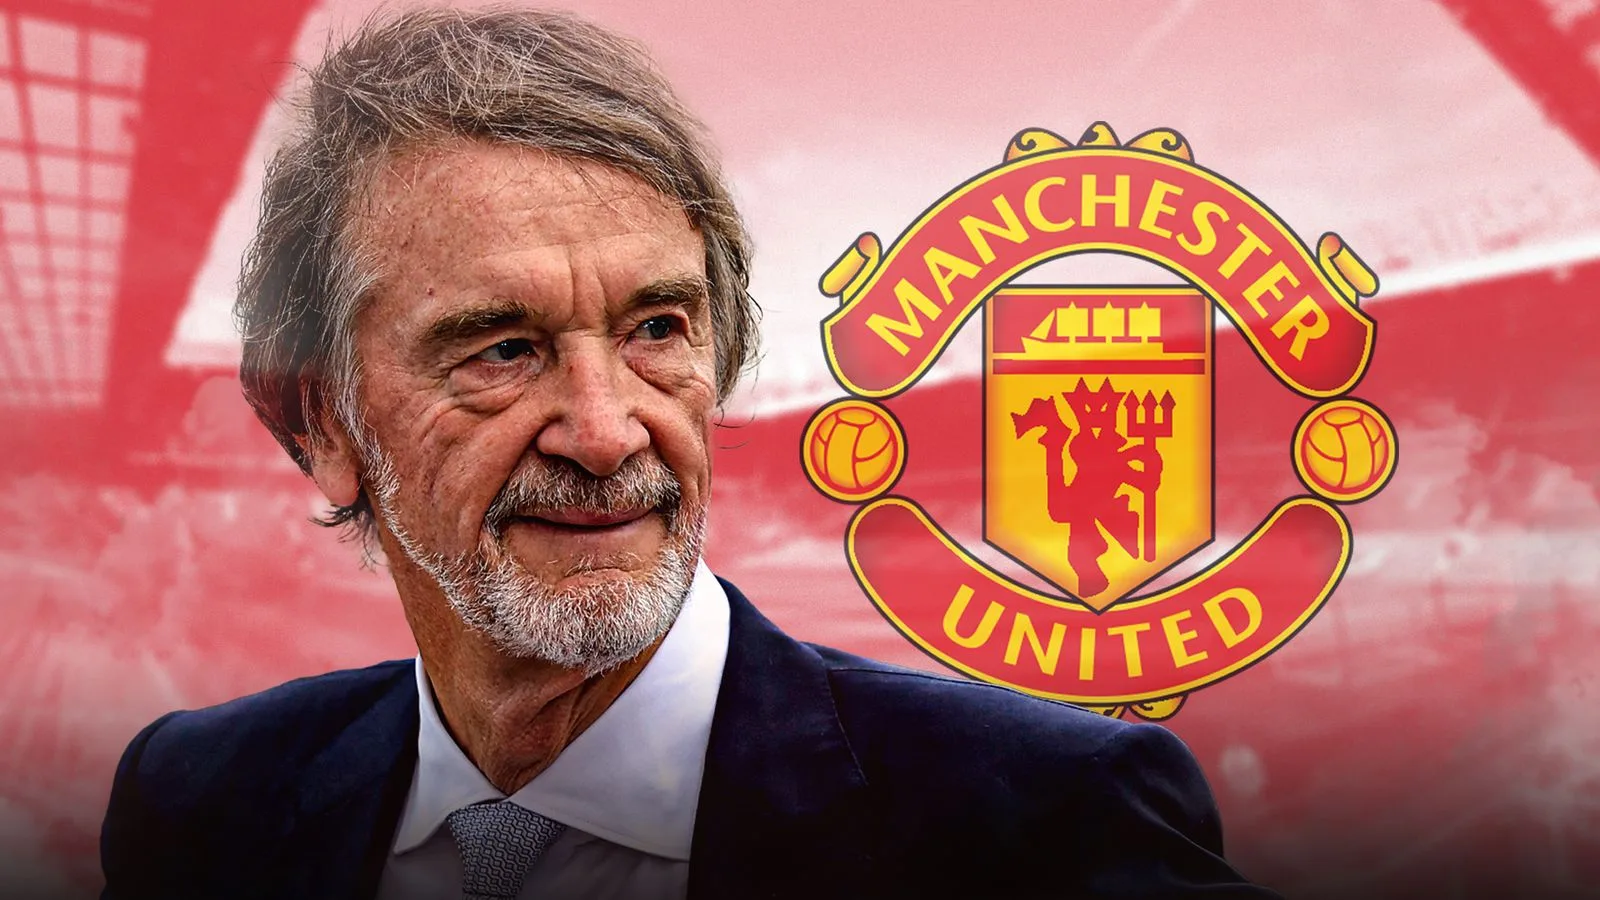 Manchester United Sells 25% Ownership to Jim Ratcliffe